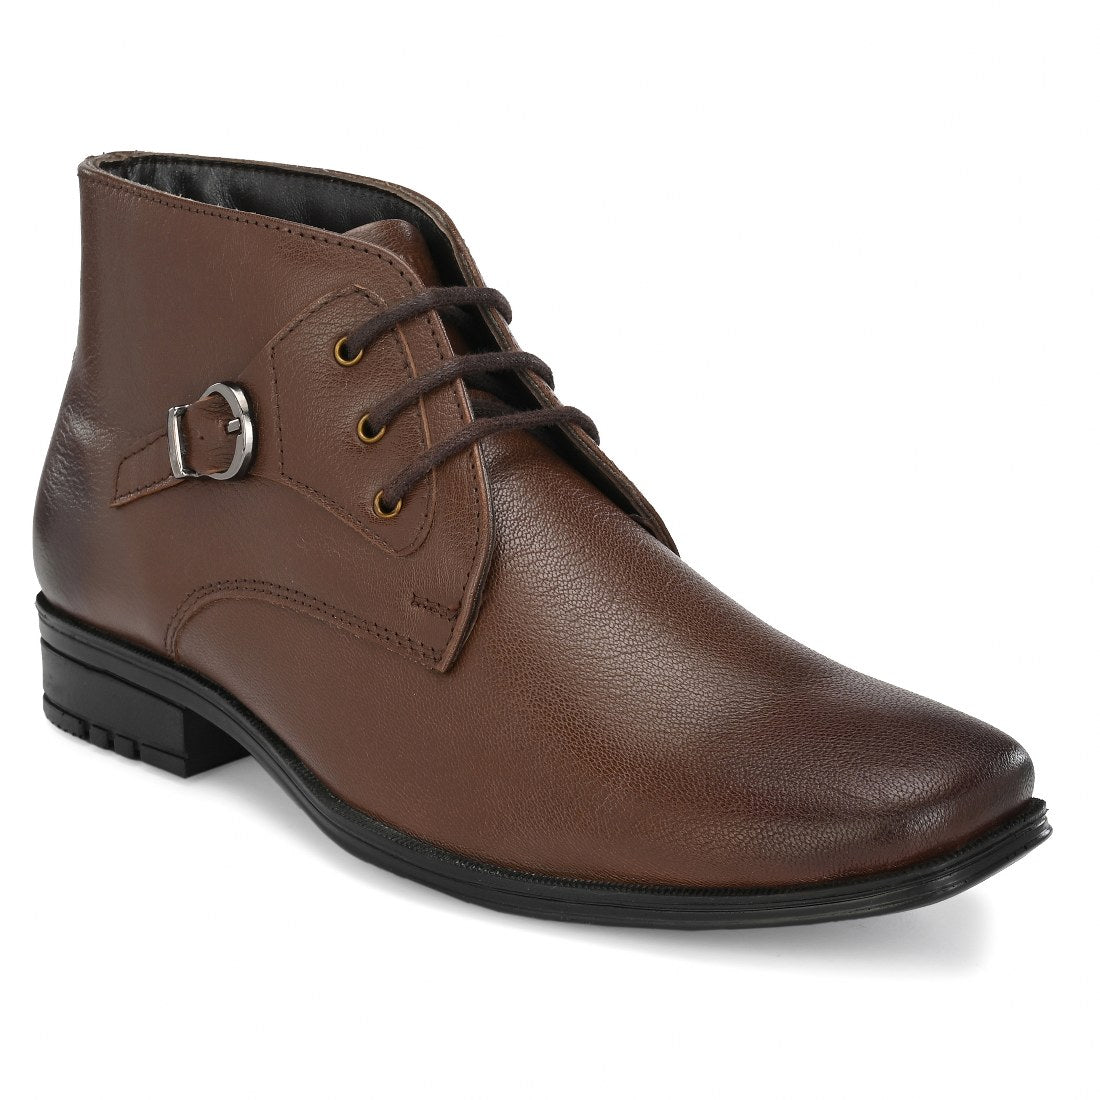 NEWTOP-95 MEN LEATHER TAN-MOCCA FORMAL BOOT ANKLE DERBY